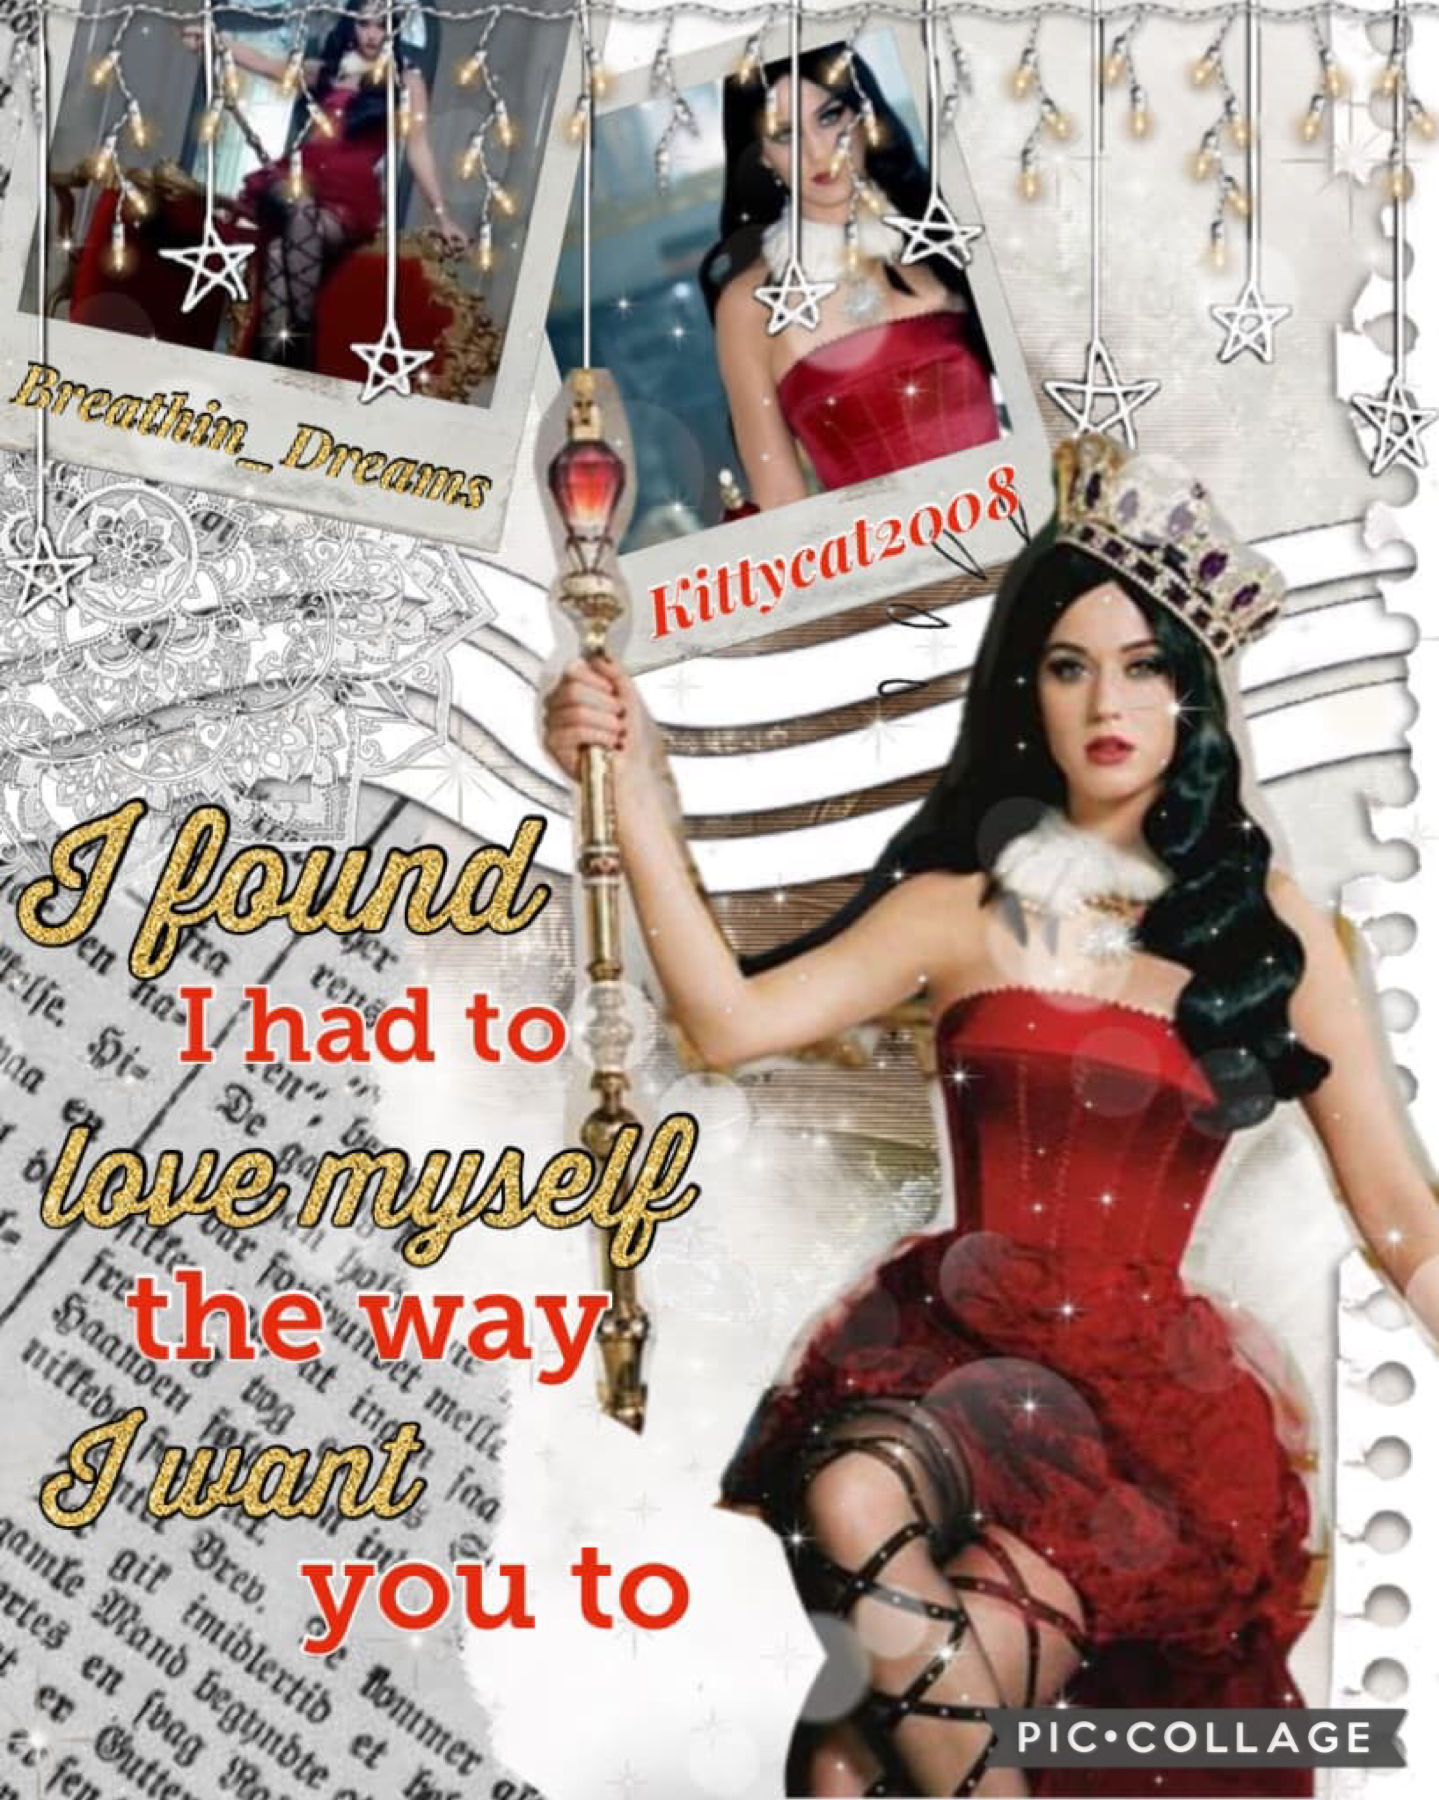 ❤️ TAP ❤️
❤️ Collab with the AMAZING @Breathin_Dreams! ❤️
❤️ katy Perry royalcore aesthetic ❤️
❤️ lyrics from the song ‘Love Me’ by katy perry! ❤️
❤️ im tired its been a ling mentally draining say :(❤️
❤️ ILYSMMM ❤️
❤️❤️